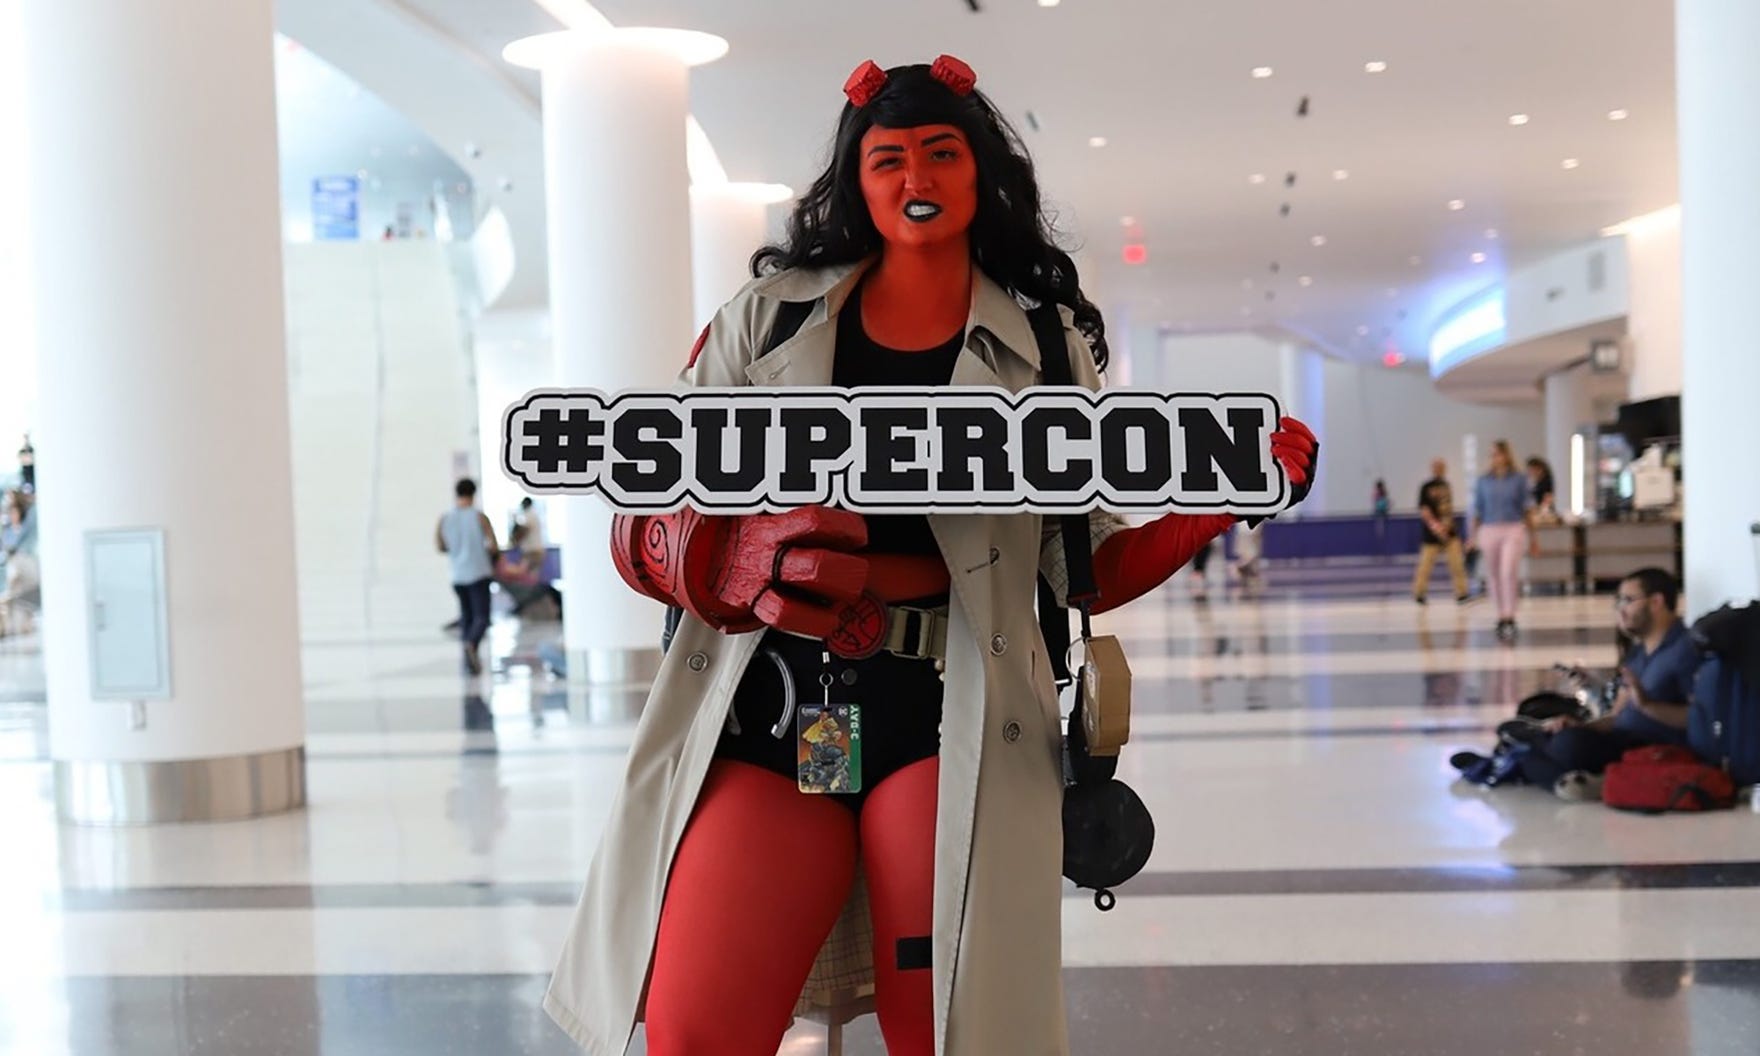 Miami! Get ready for the next Florida Supercon, as we have the 2024 FSC